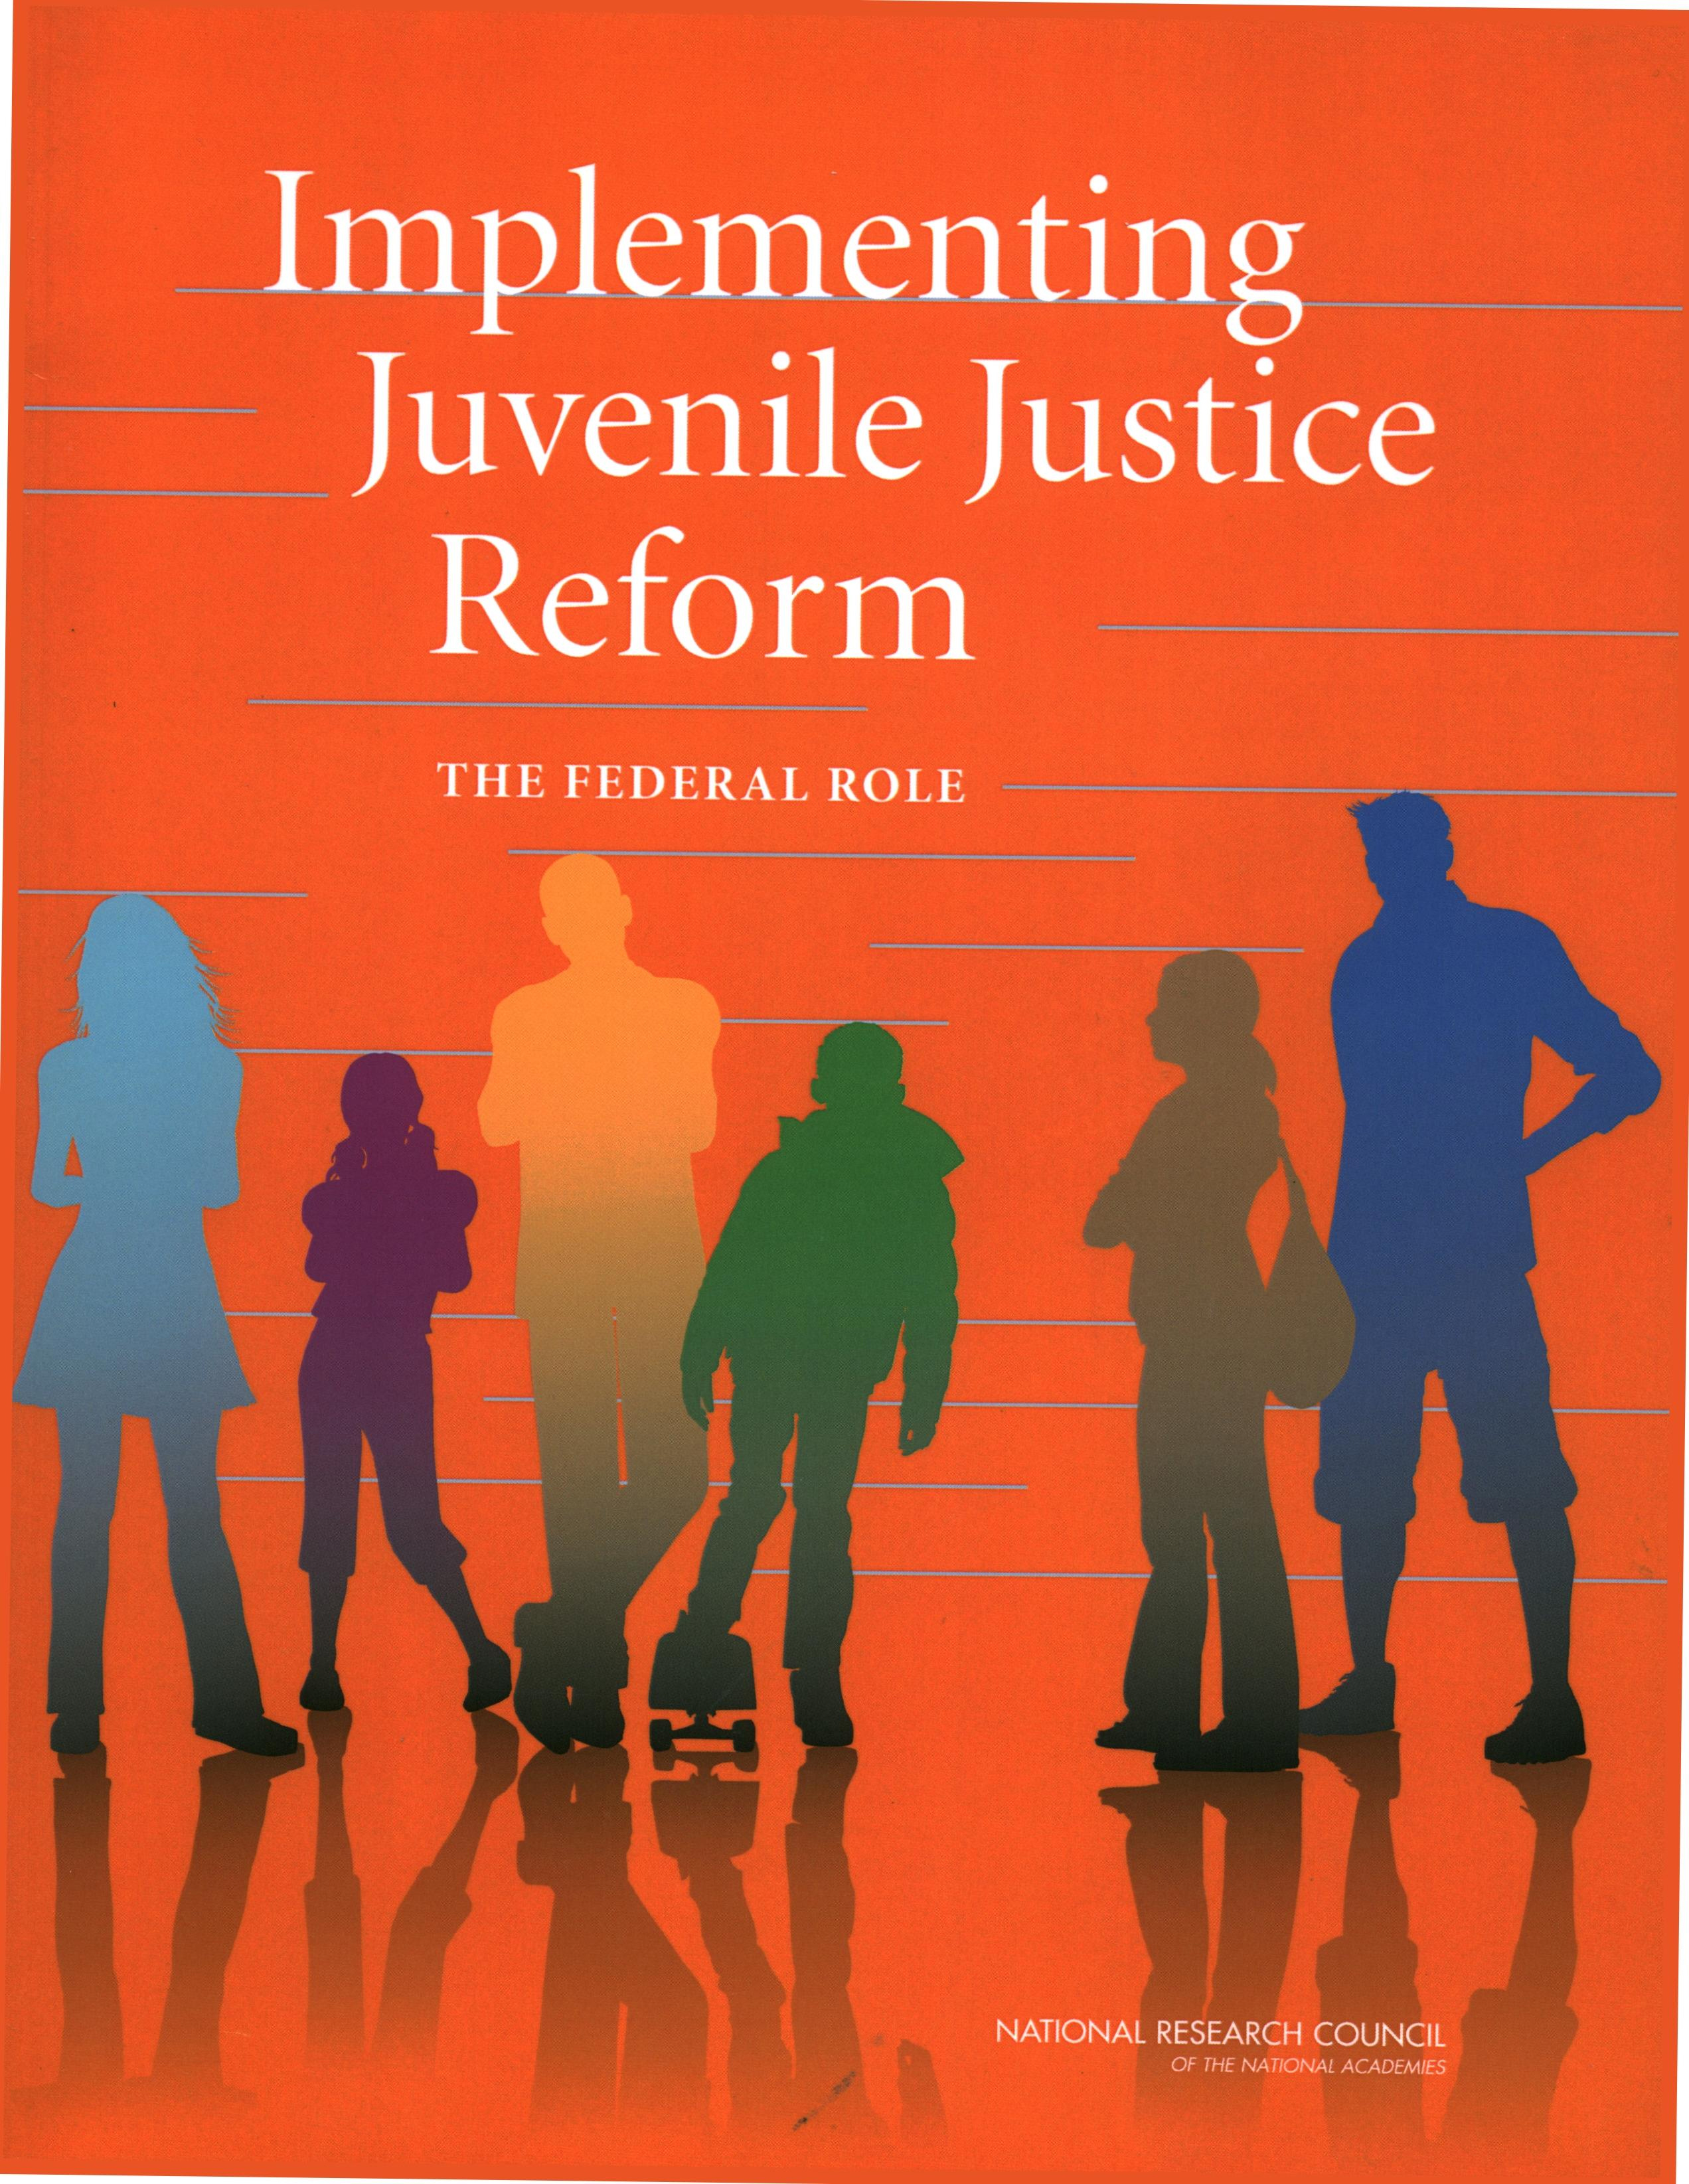 Implementing juvenile justice reform. The Federal role